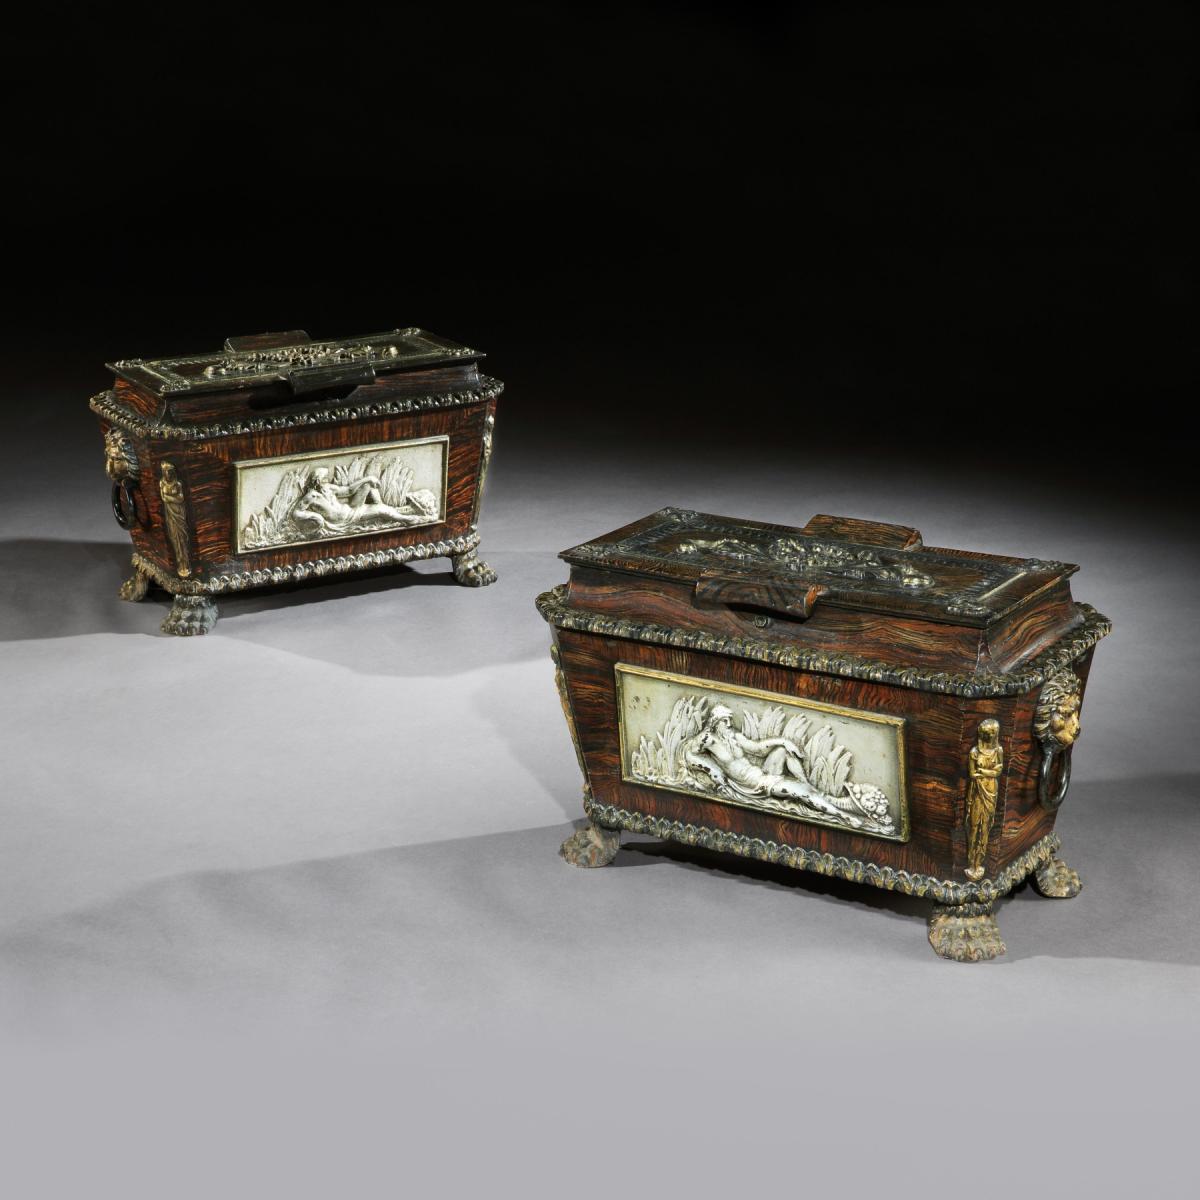 Rare Pair Of Regency Cast-Iron Sarcophagus Shaped Strong Boxes